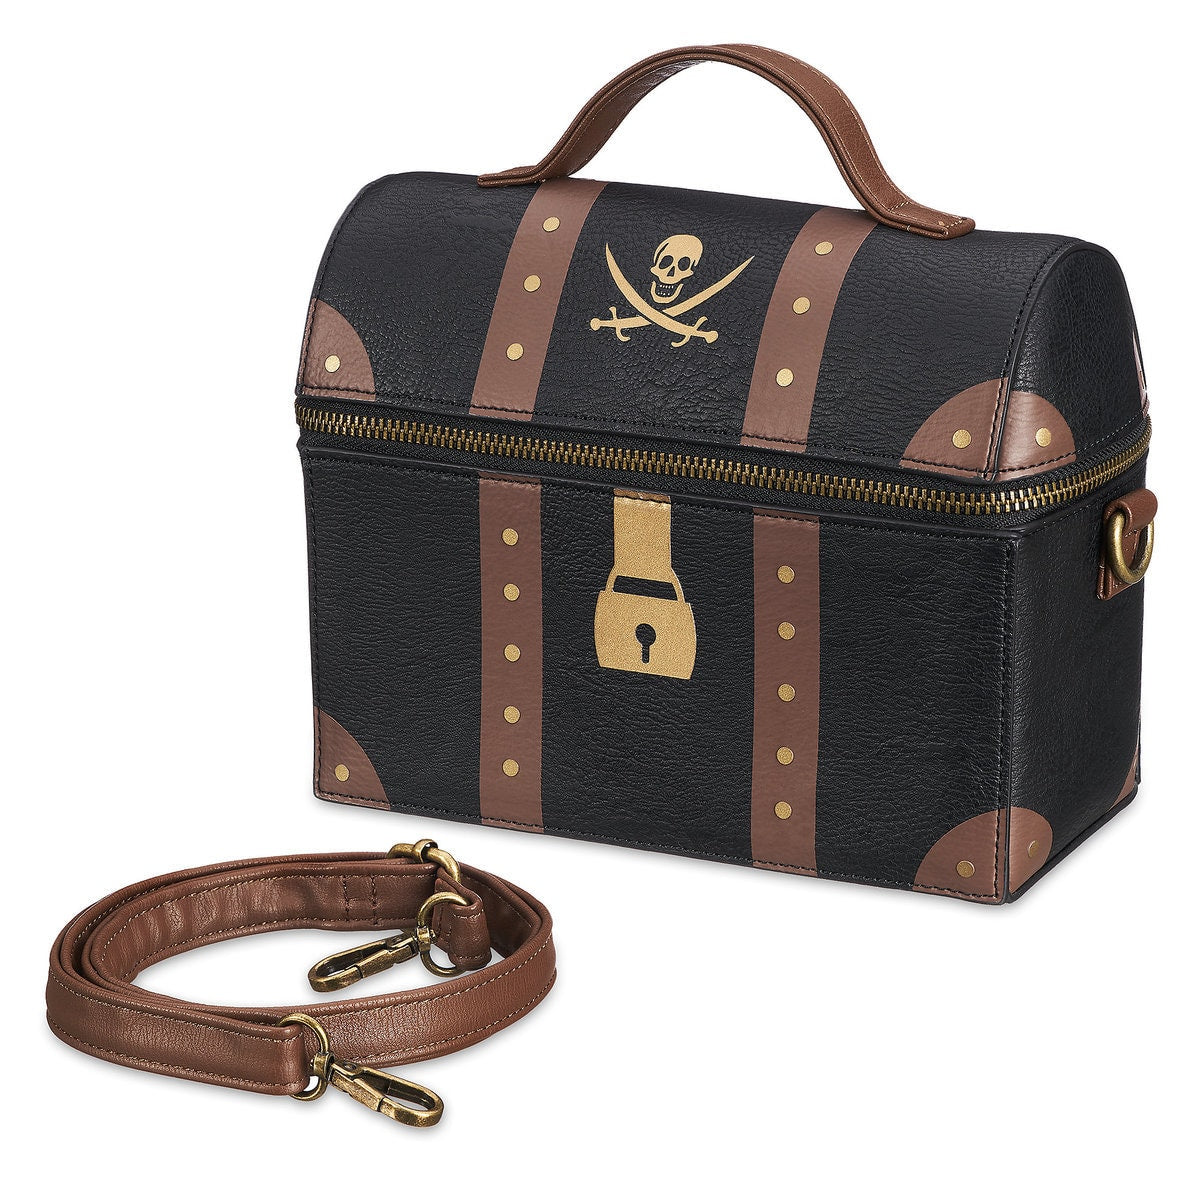 Disney Parks Pirates of the Caribbean Redd Treasure Chest Handbag New with Tags